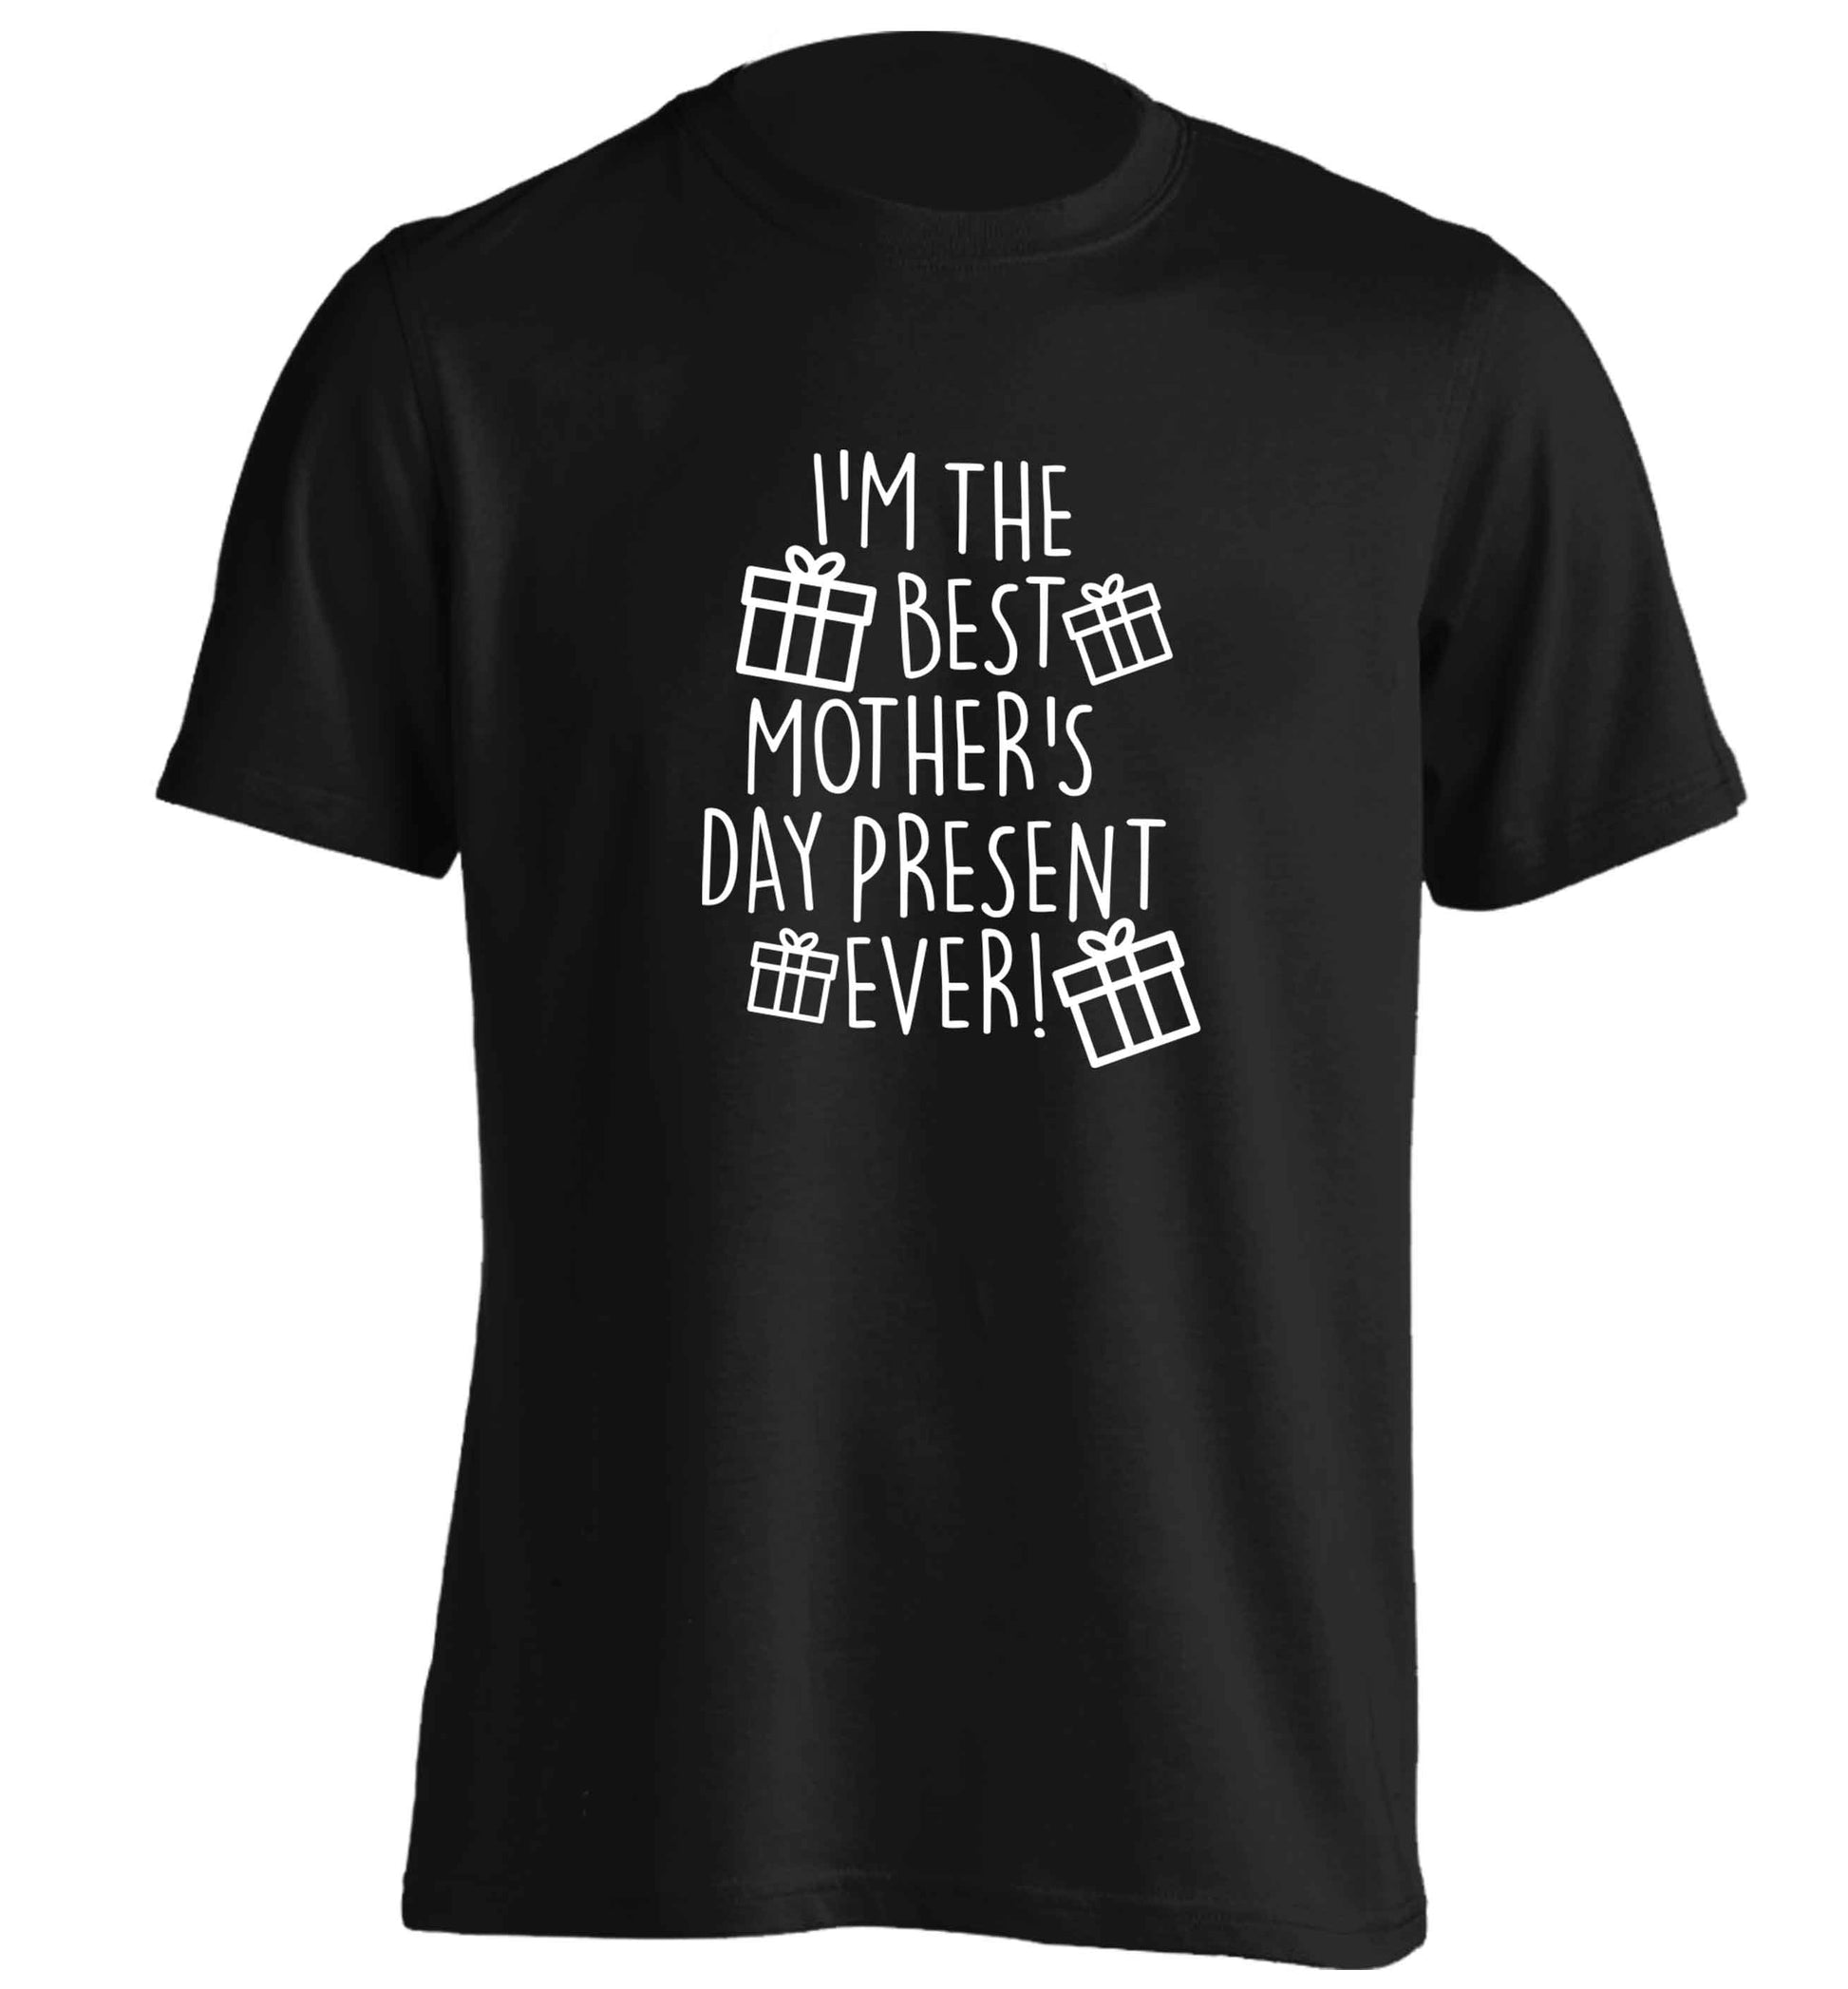 I'm the best mother's day present ever! adults unisex black Tshirt 2XL